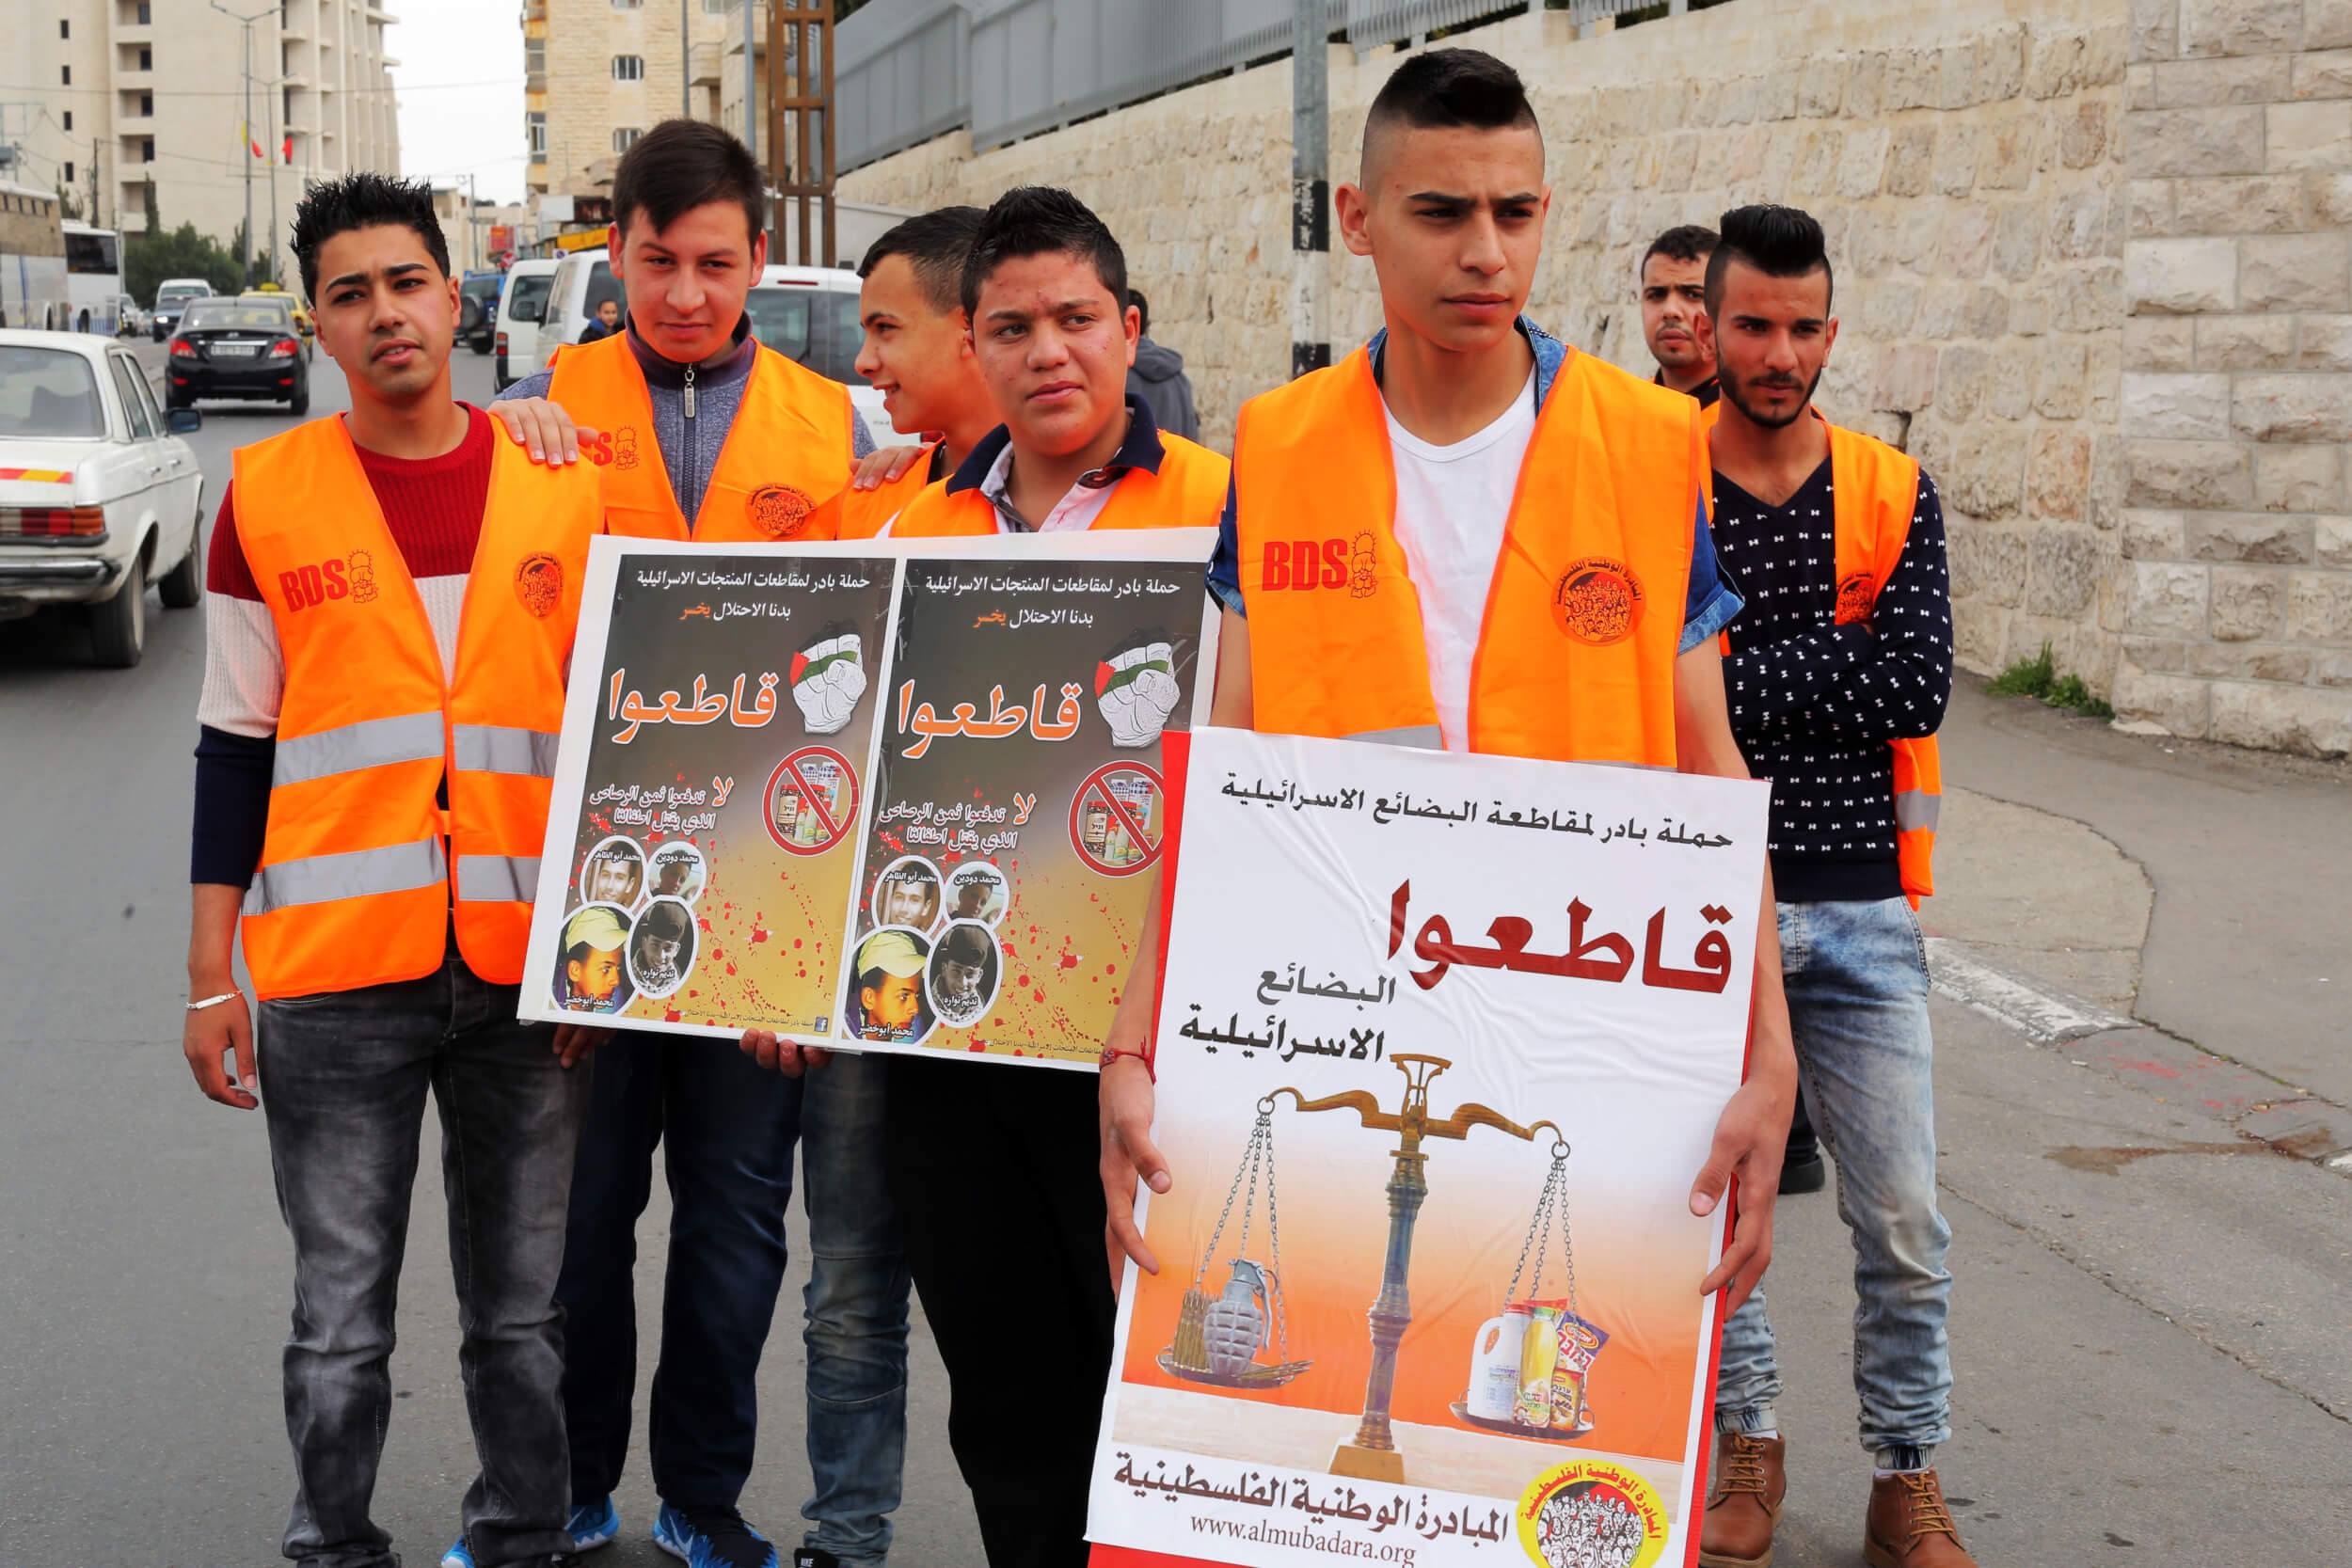 Most of the marchers were local students with the PNI movement (Photo: Abed al Qaisi)